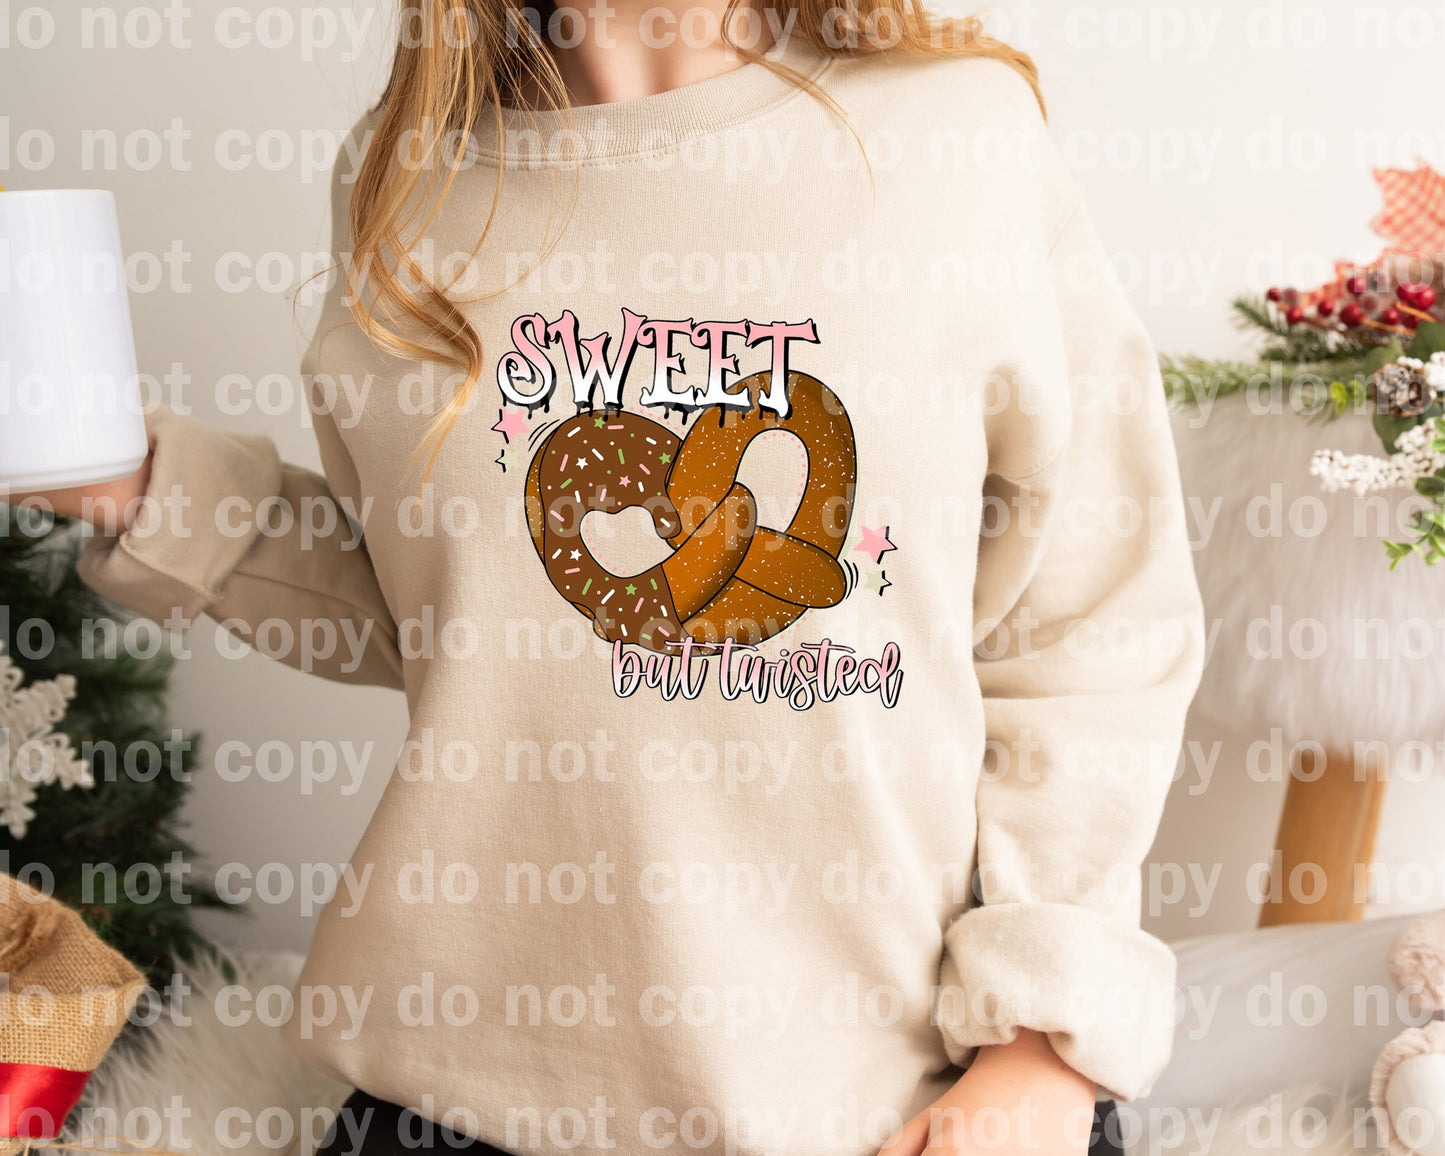 Sweet But Twisted With Optional Two Rows Sleeve Designs Dream Print or Sublimation Print